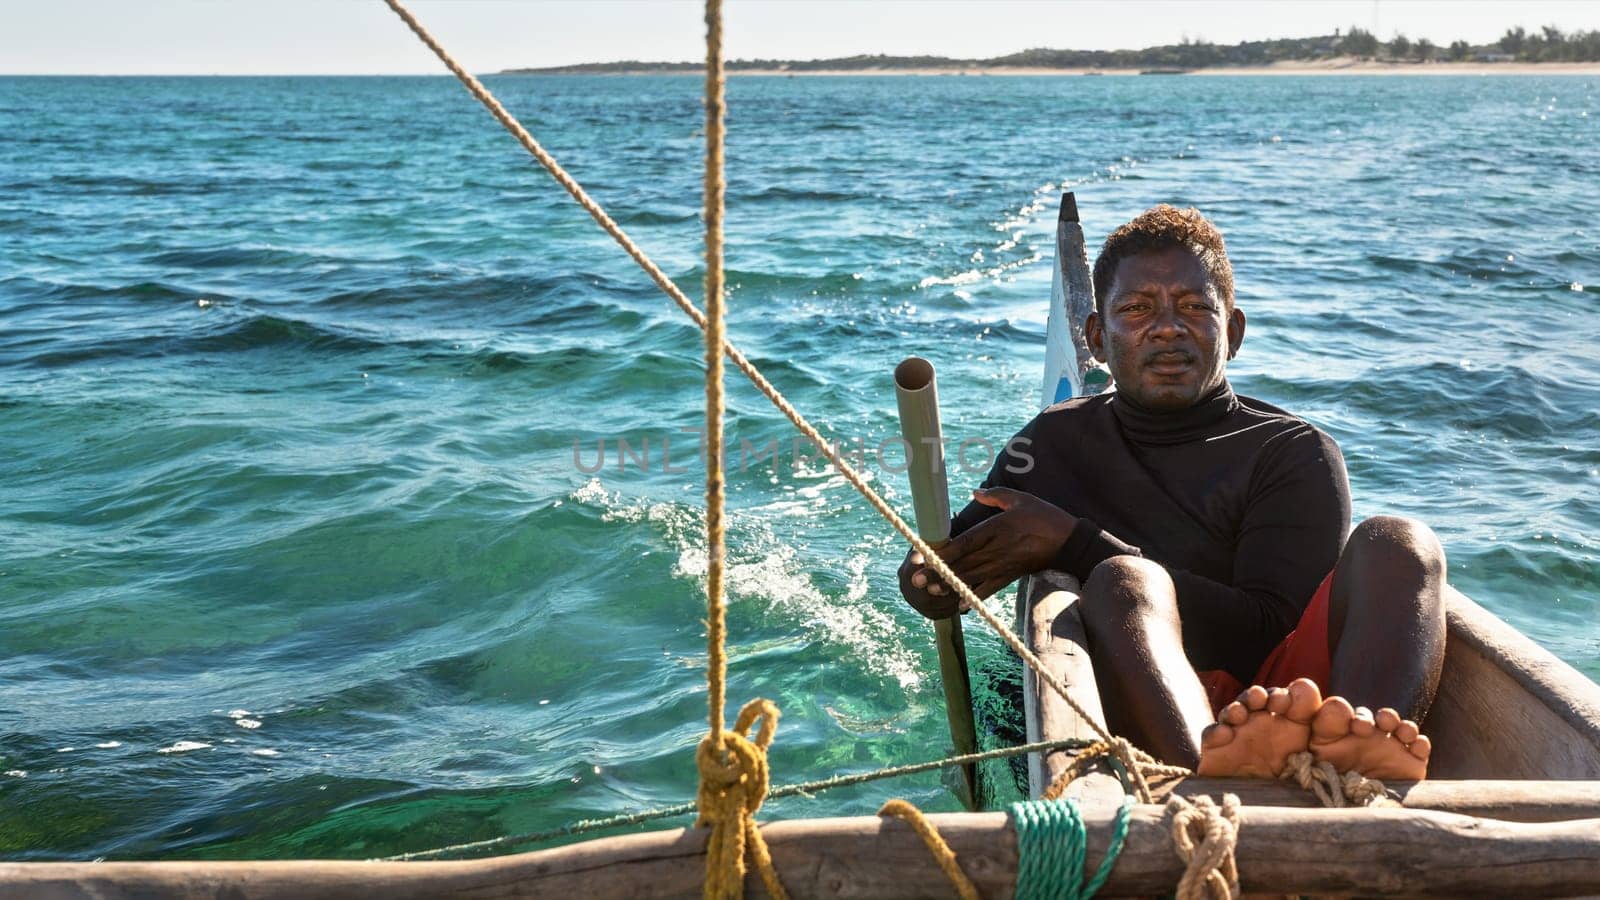 Anakao, Madagascar - May 03, 2019: Unknown Malagasy fisherman sitting on back of his piroga (small fishing boat), leading direction with simple rudder, green blue sea during sunny day in background